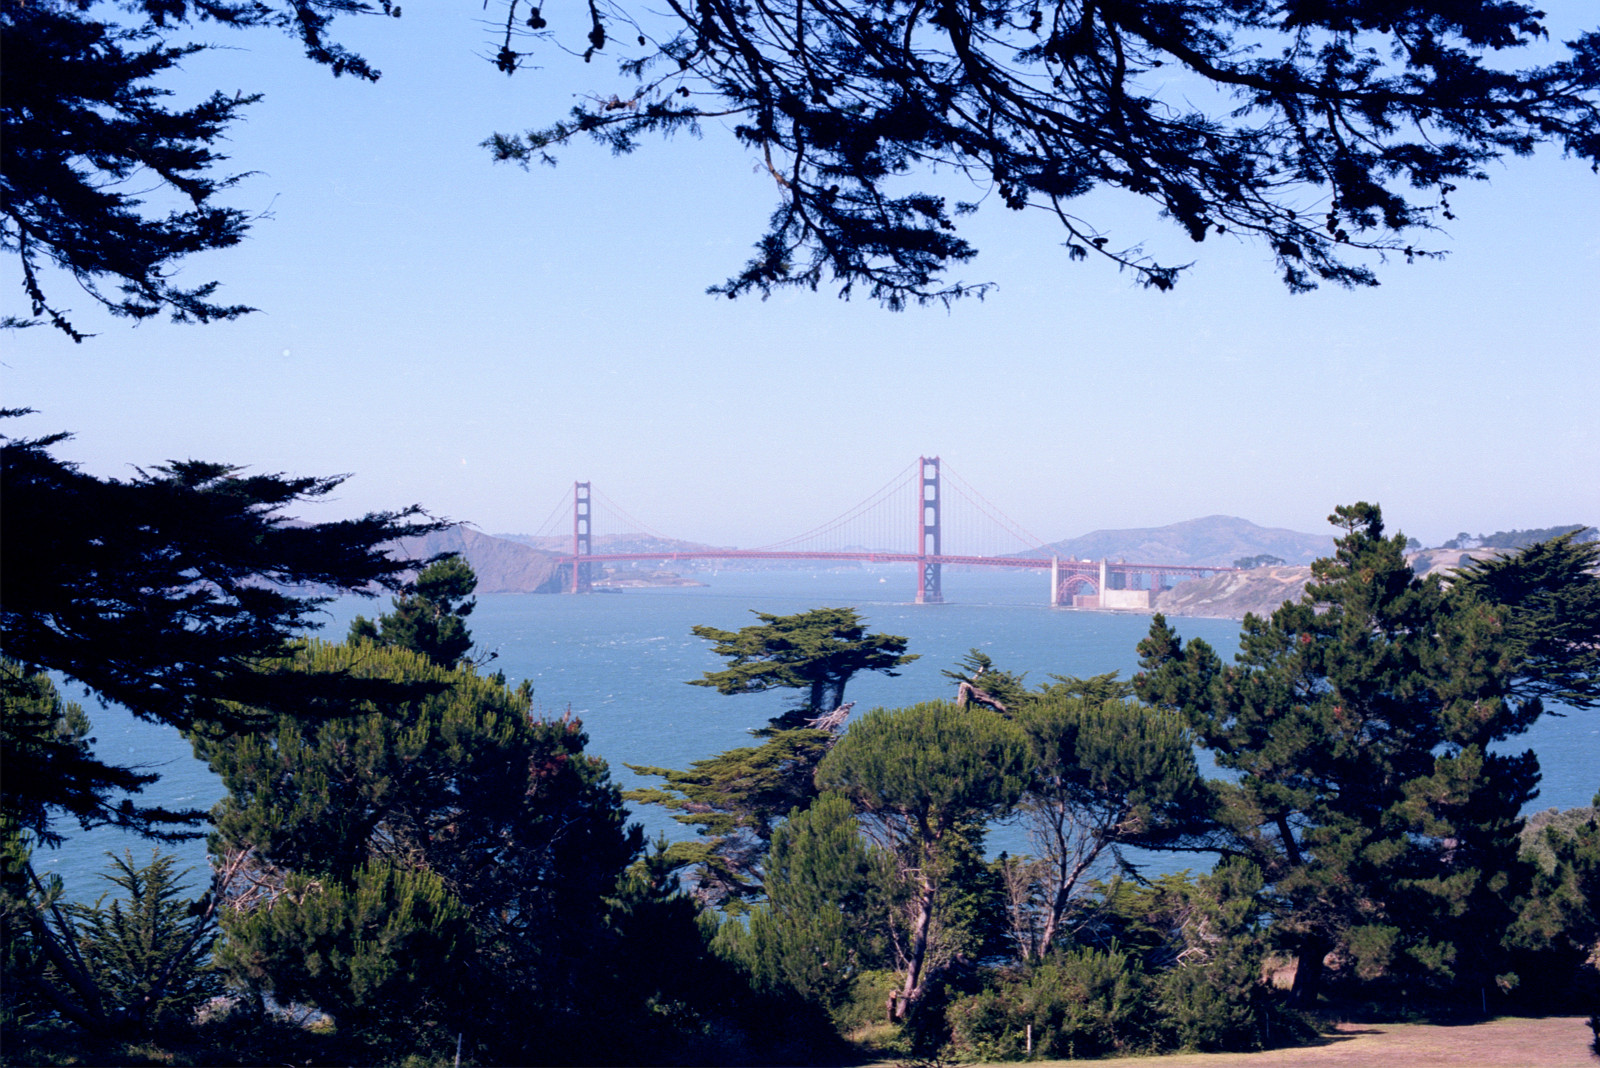 Looking toward the Golden Gate Bridge from the corniche road from Seacliff to the Palace of the Legion of Honor. In the distant background, beyond the bridge, Angel Island.